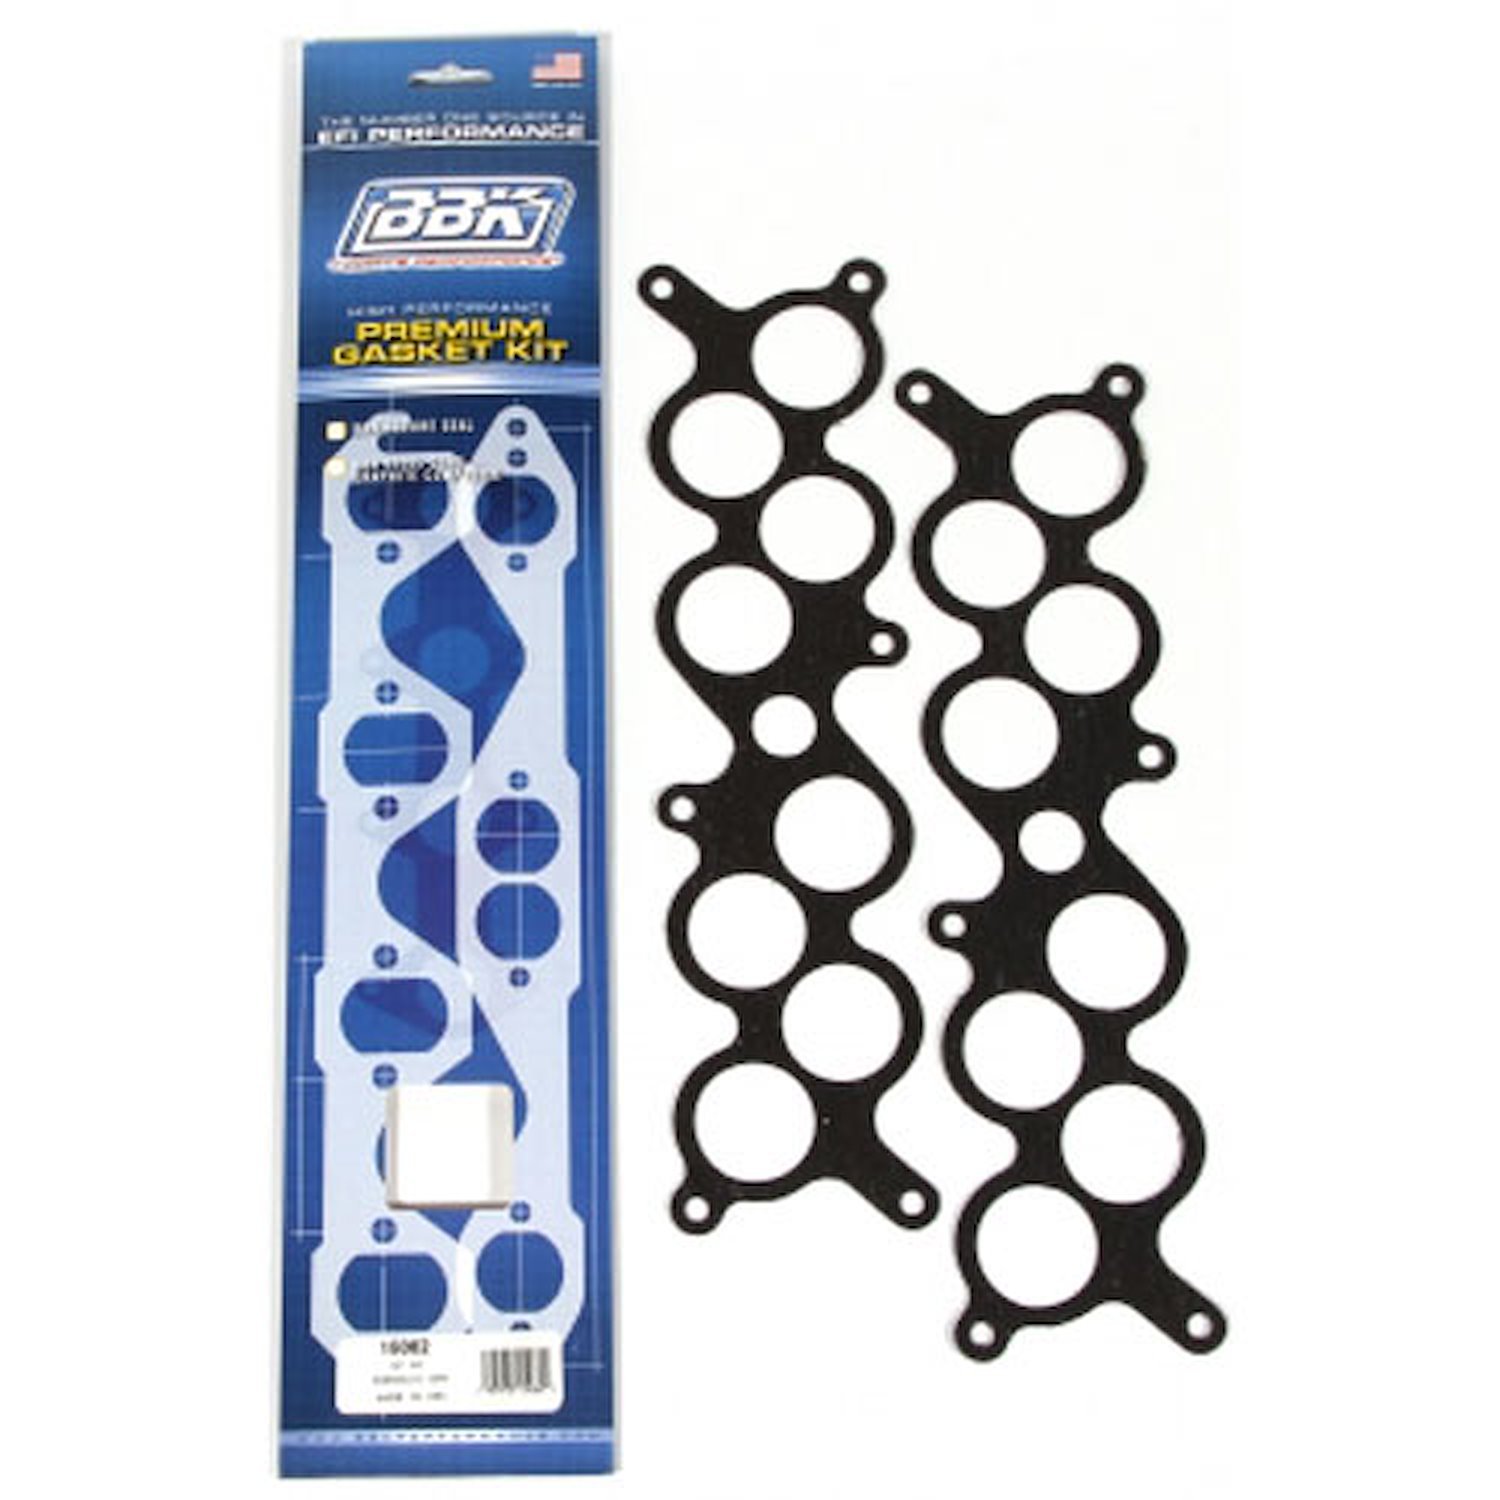 Replacement Phenolic Spacer Gaskets Ford GT-40/Cobra